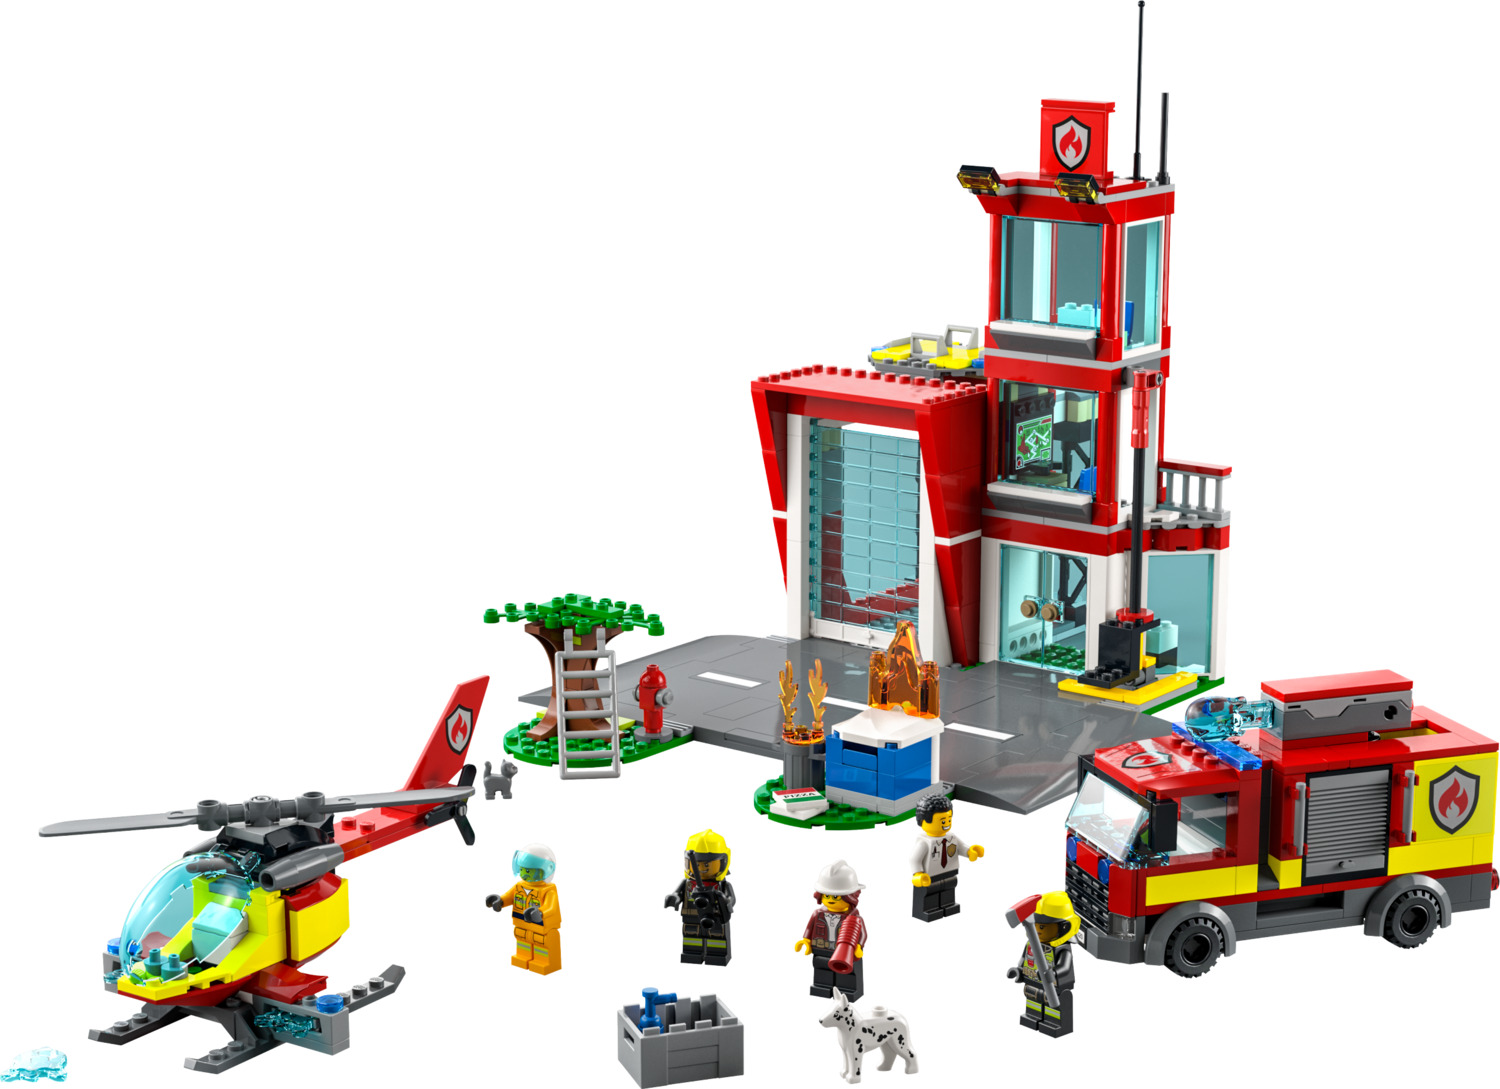 LEGO City: Fire Station Building